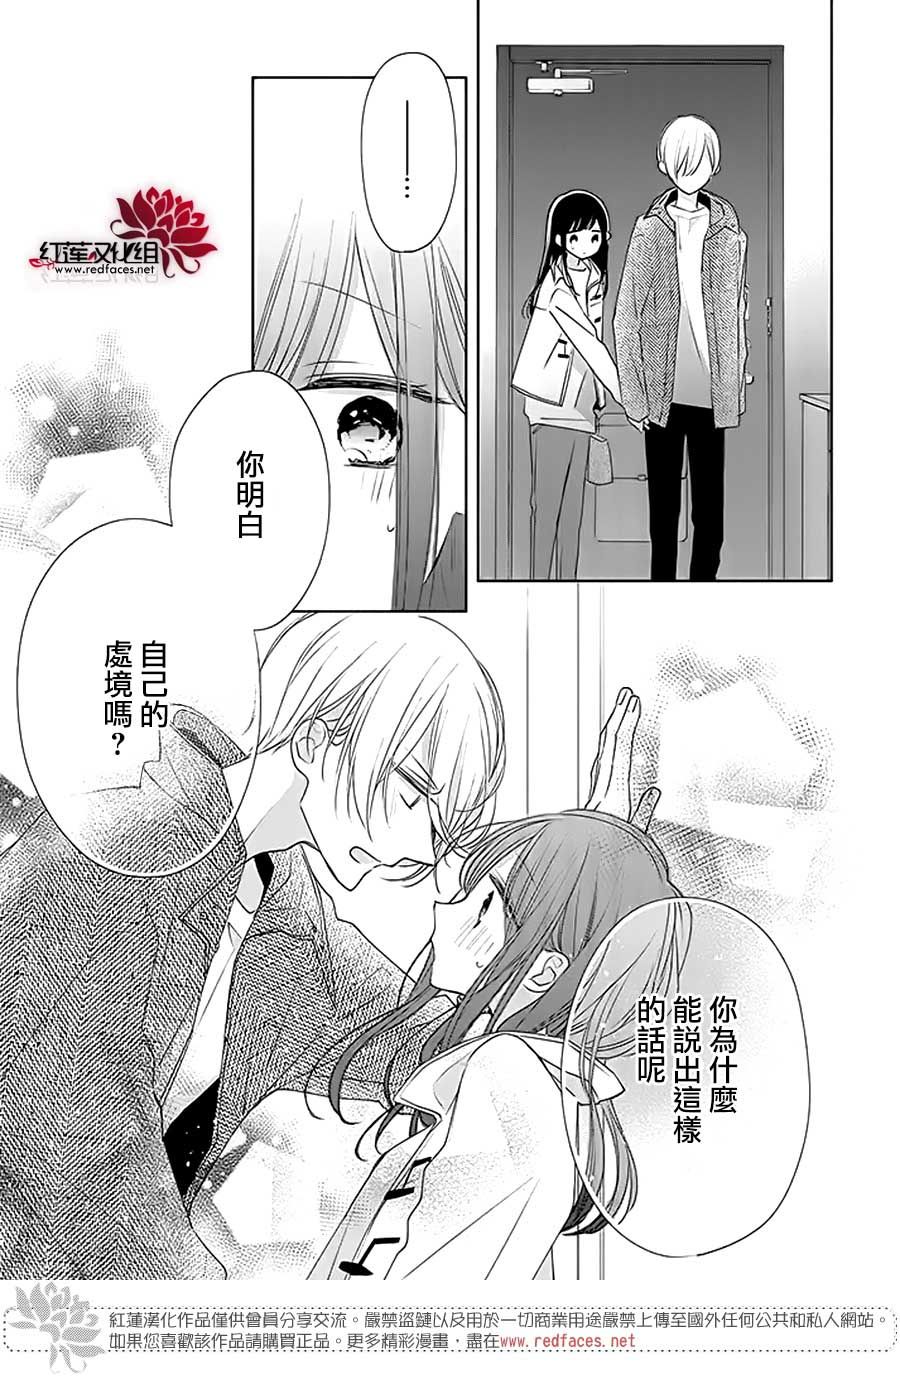 《If given a second chance》漫画 second chance 028集